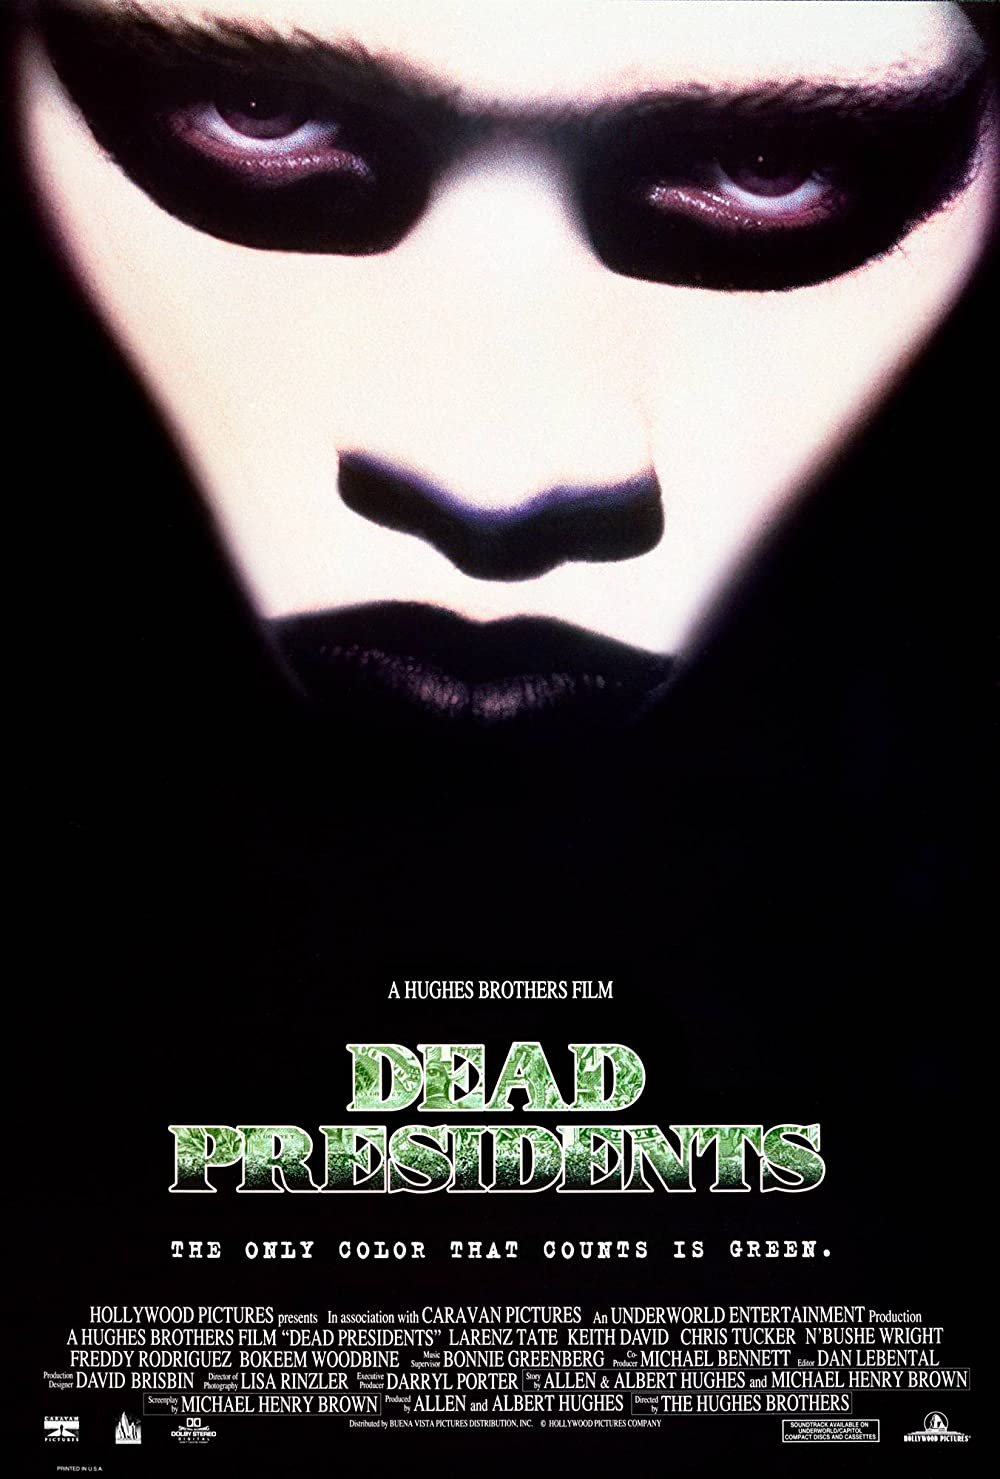 Dead Presidents image © Hollywood Pictures